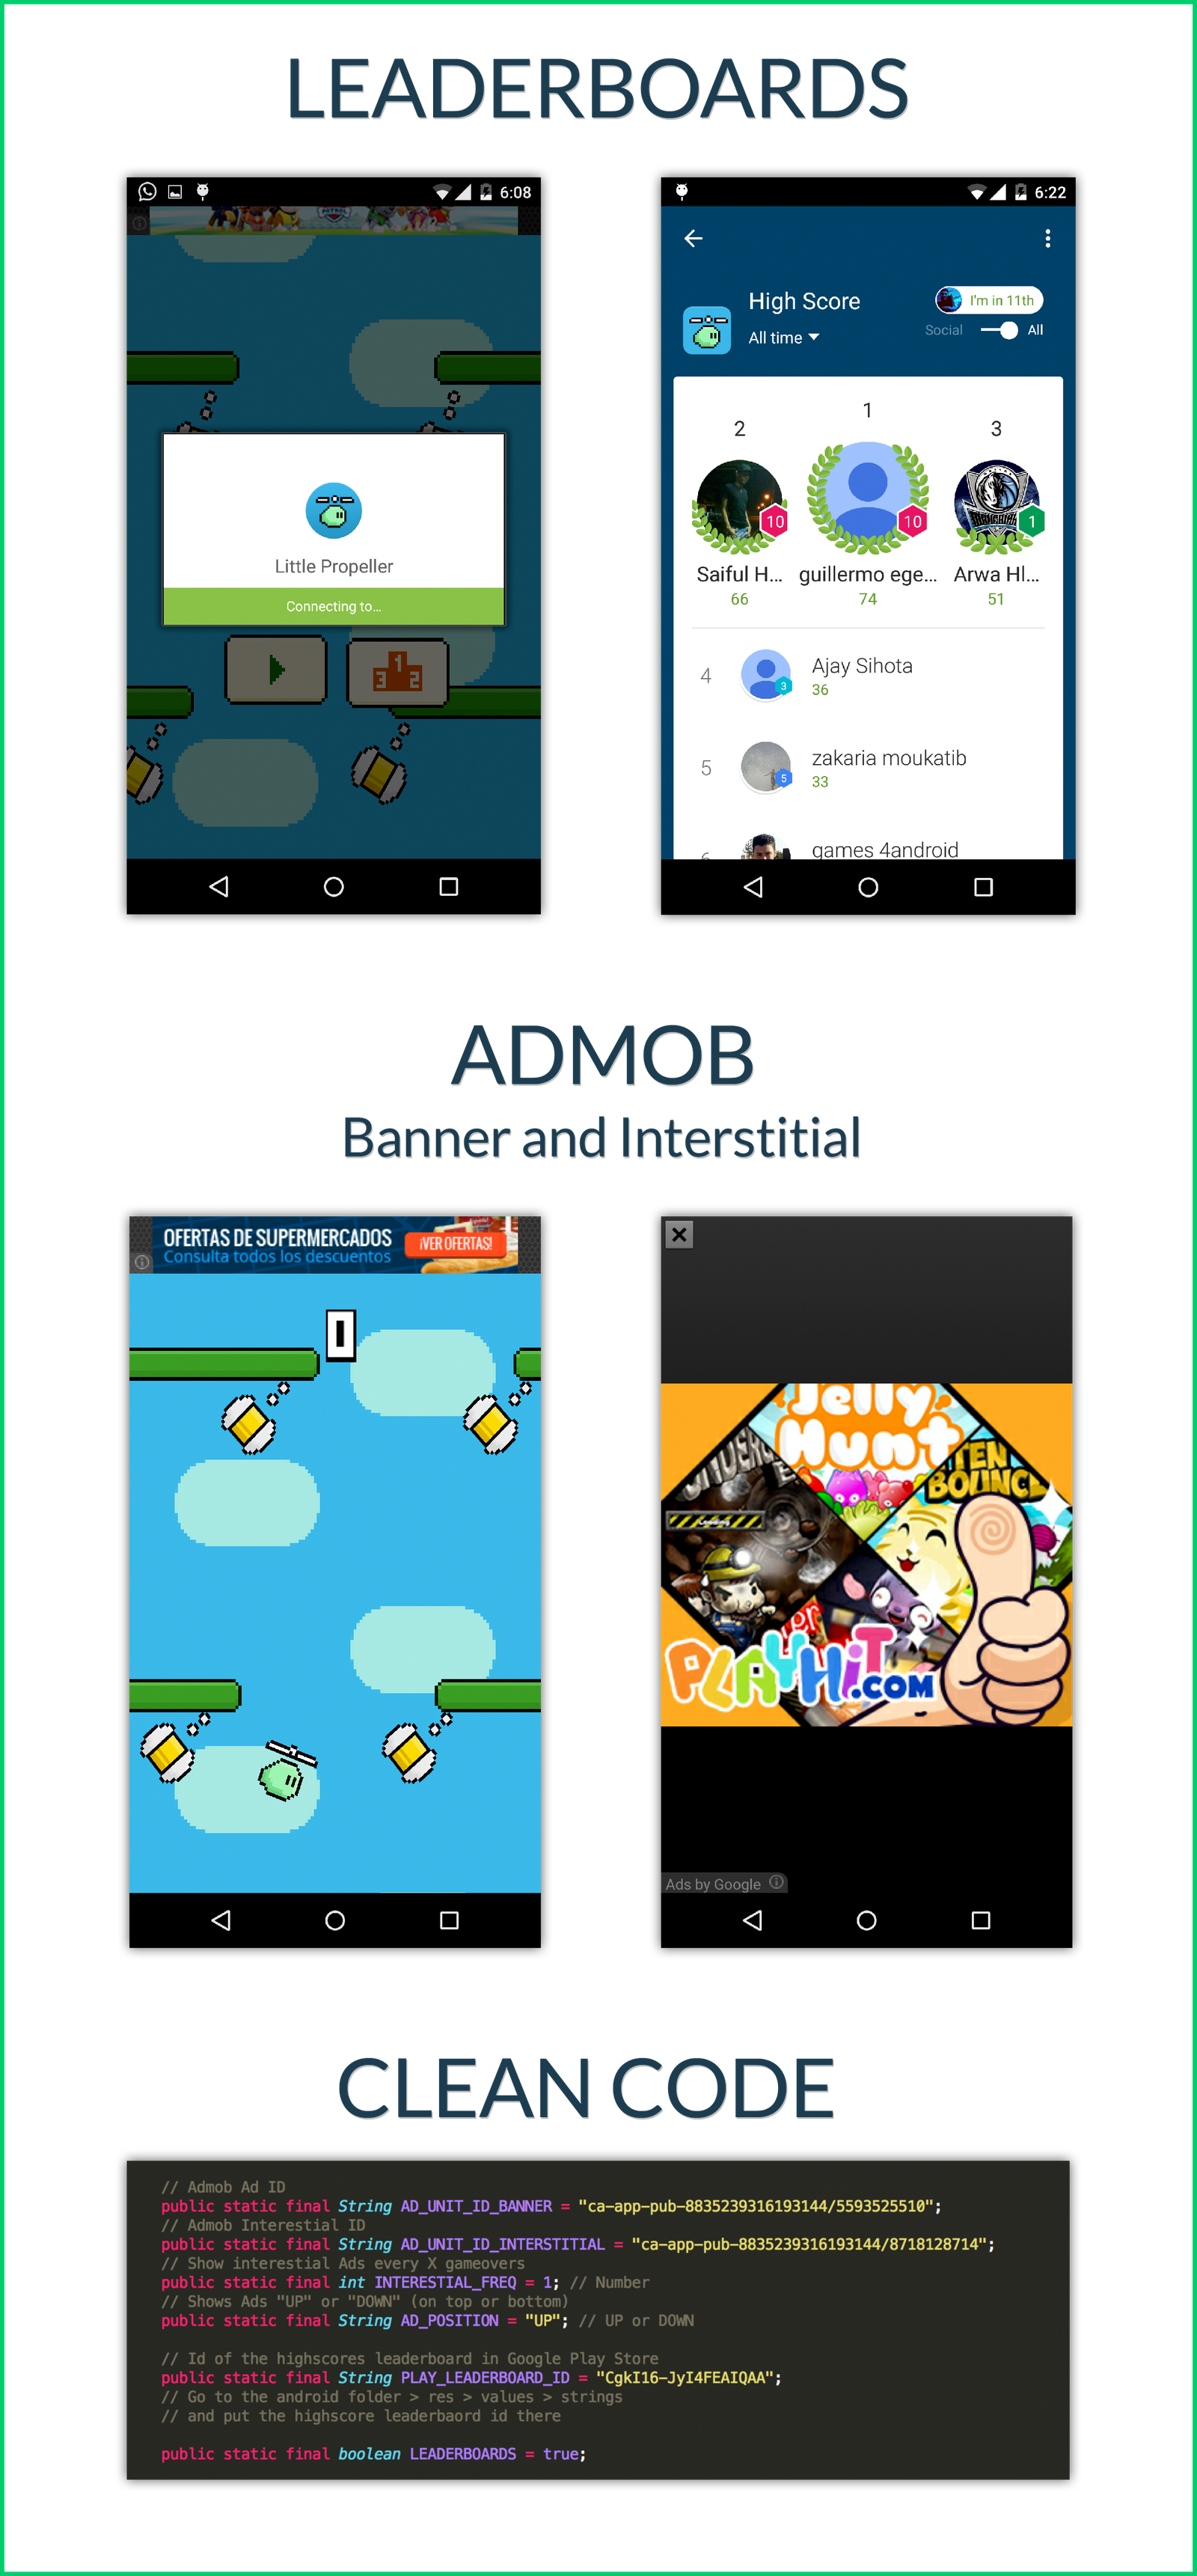 Mad Copter with Admob - Avoidance Game + Interstitials + Leaderboards - 1